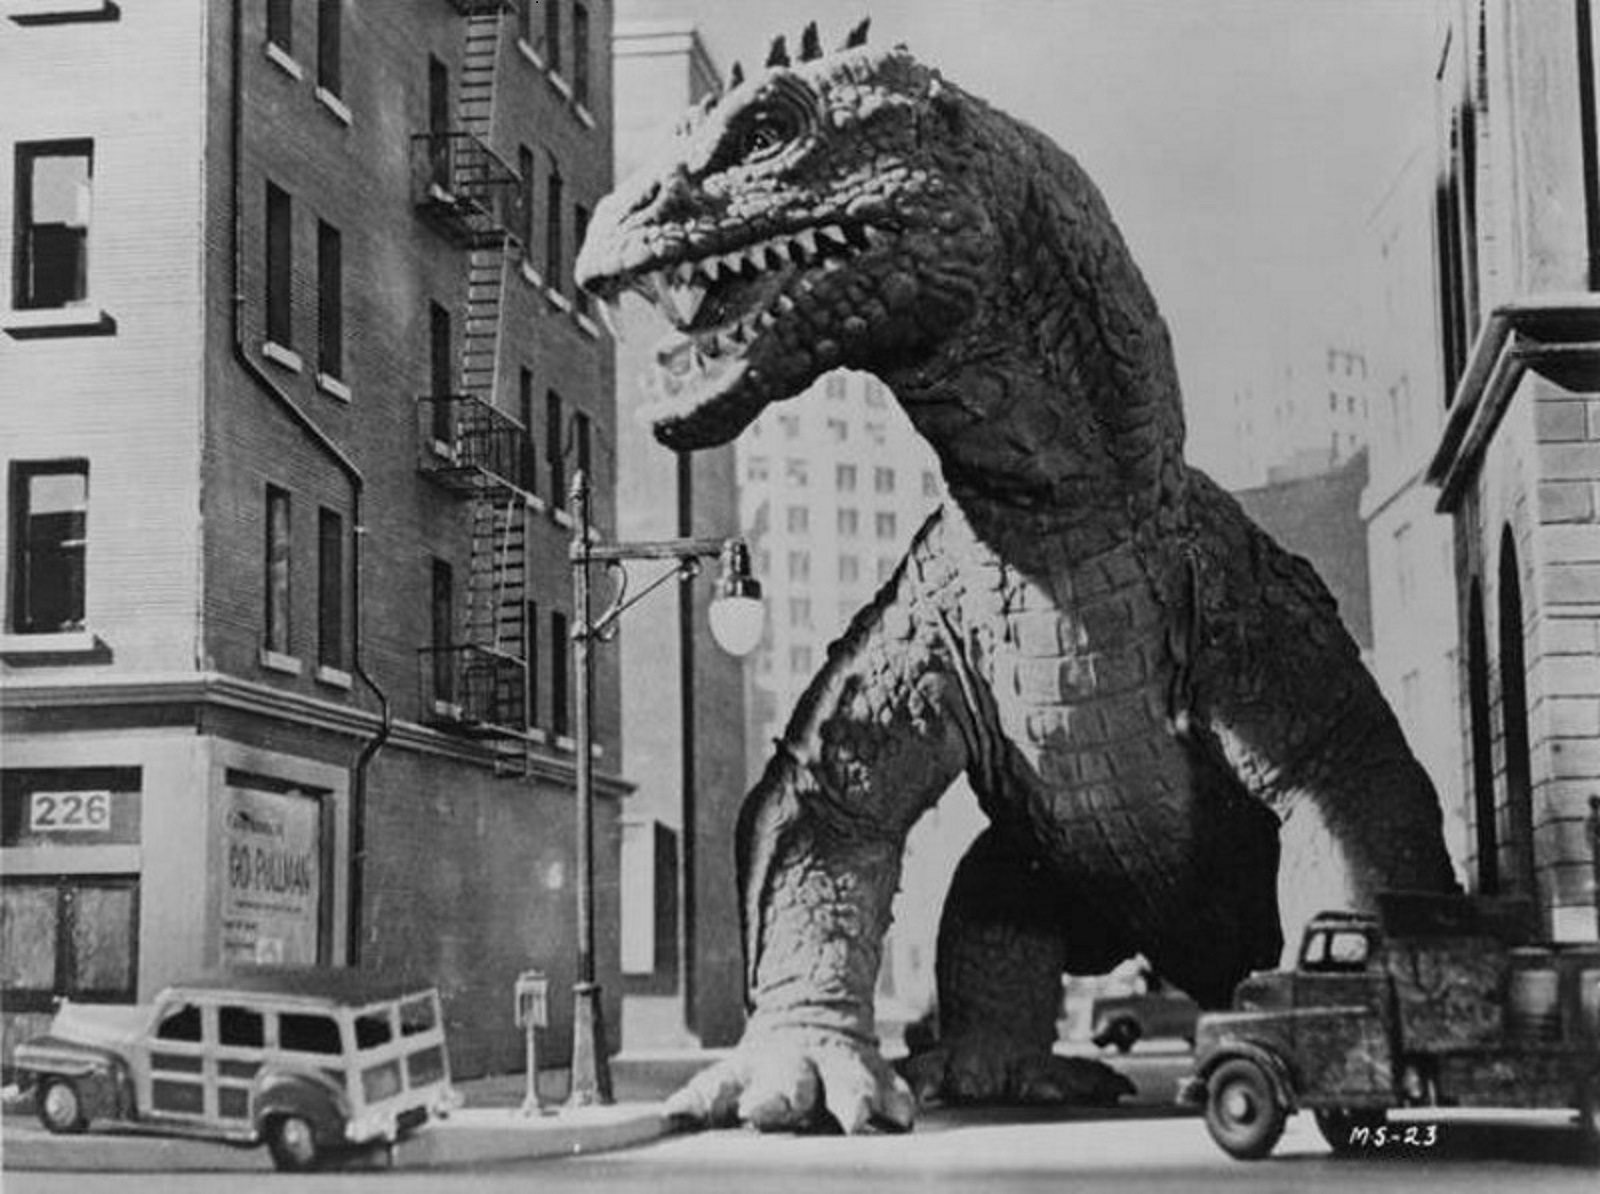 The rhedosaurus in The Beast from 20,000 Fathoms (1953)